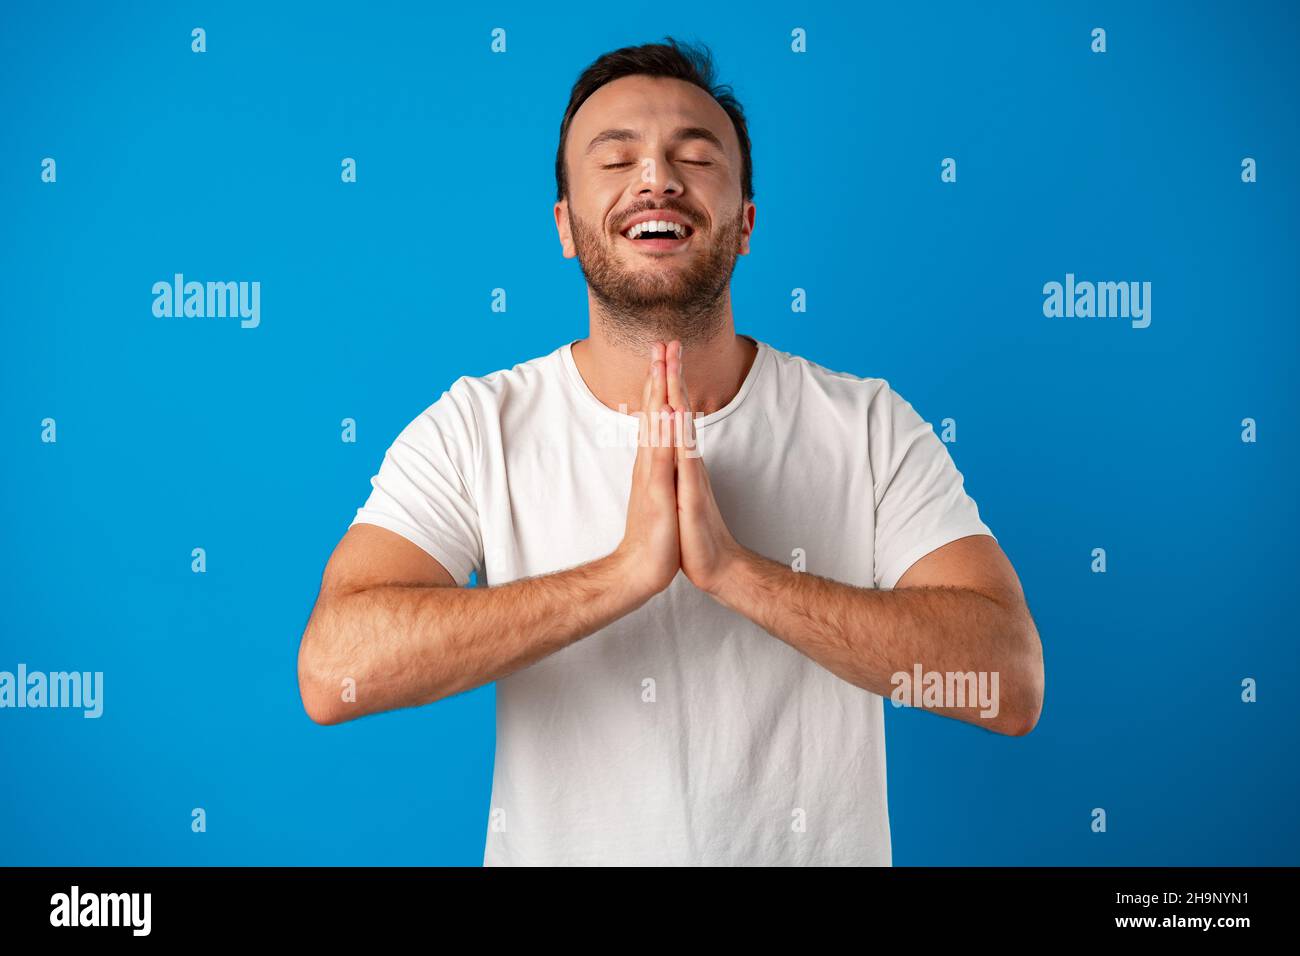 Focused handsome young man meditating on camera over blue background Stock Photo